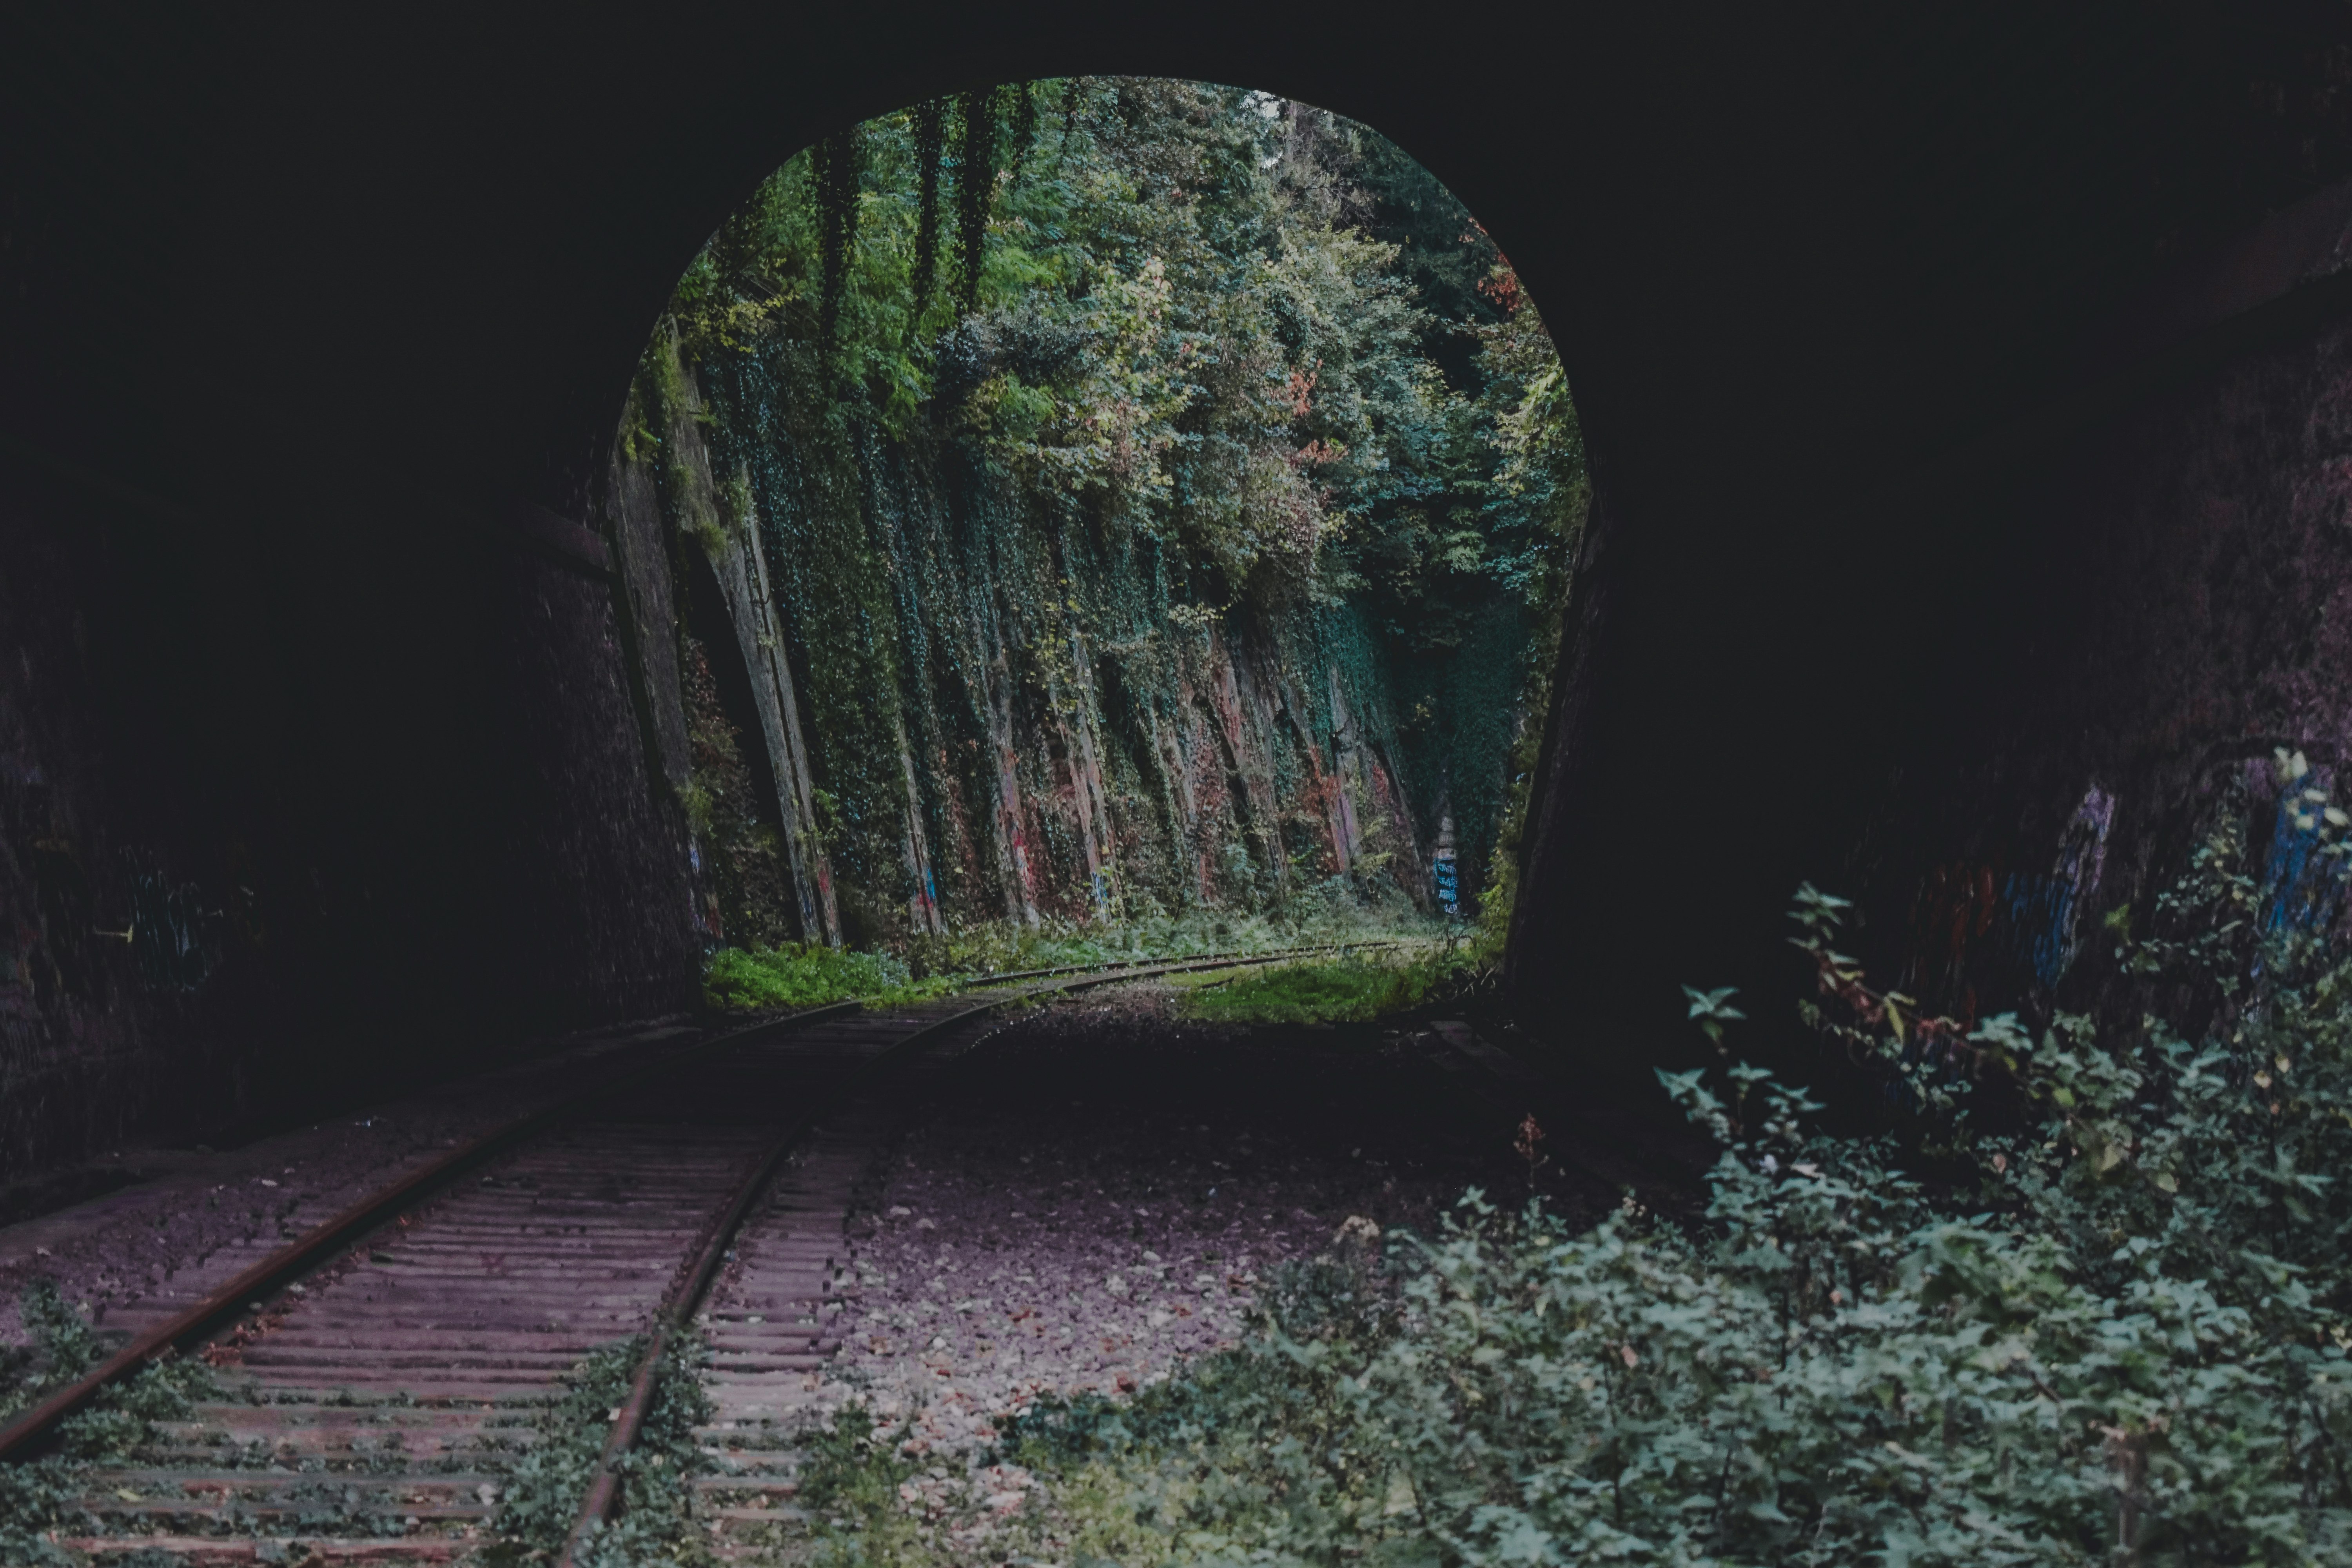 An old abandoned railway located in Paris and which goes around the capital.
It is a small quiet place that allows you to relax through a country walk